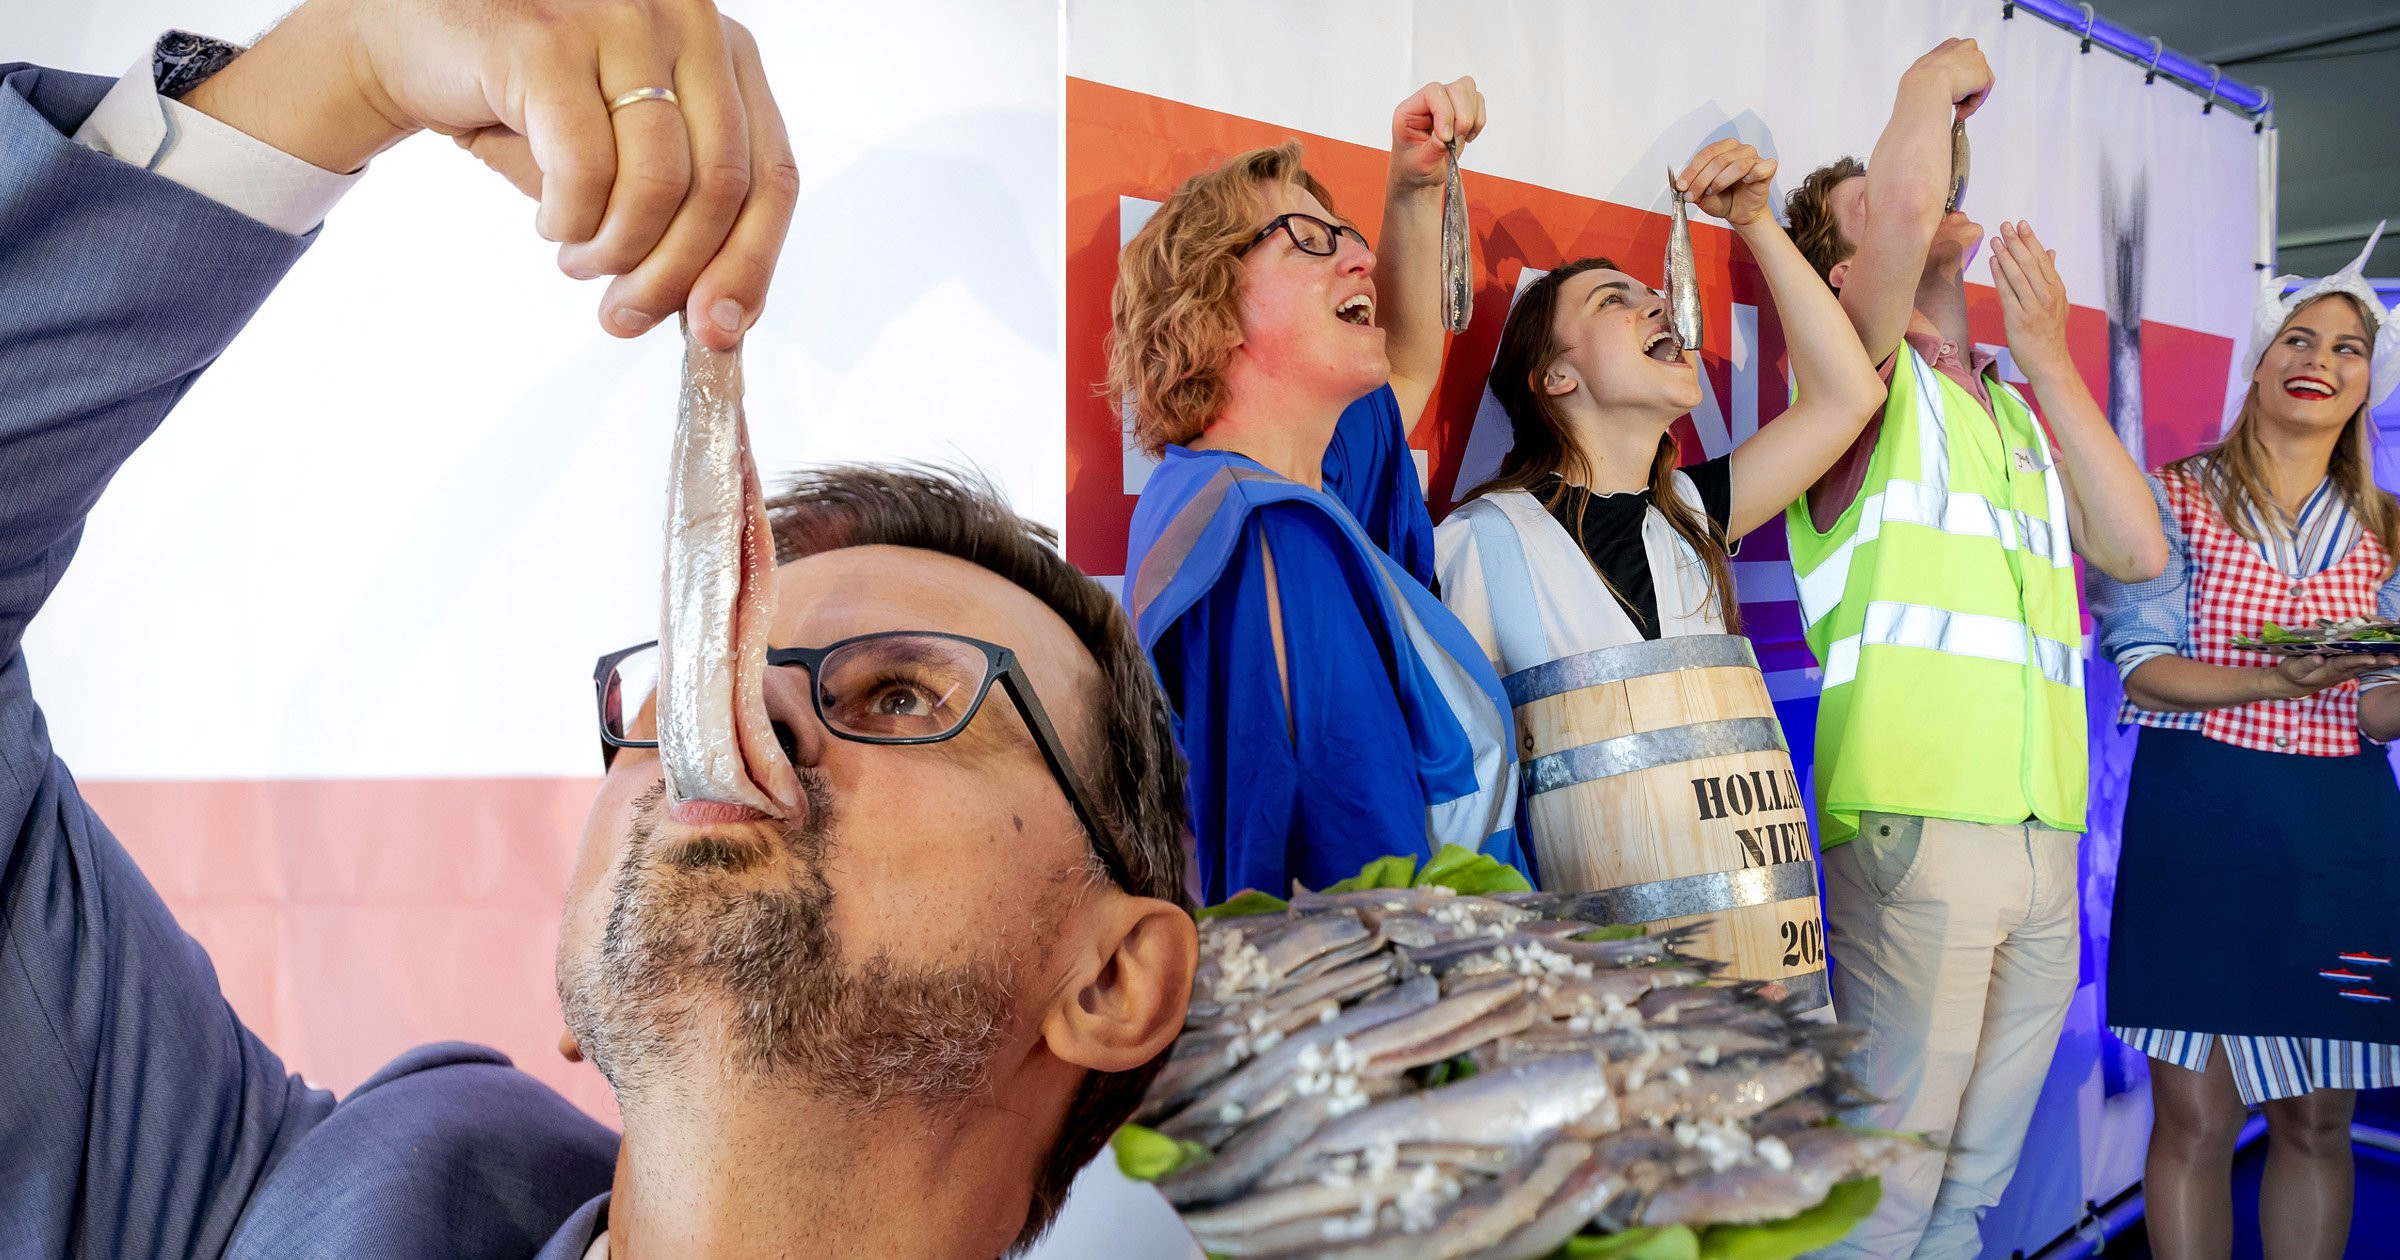 Netherlands offers free pickled herring to people who get Covid vaccine